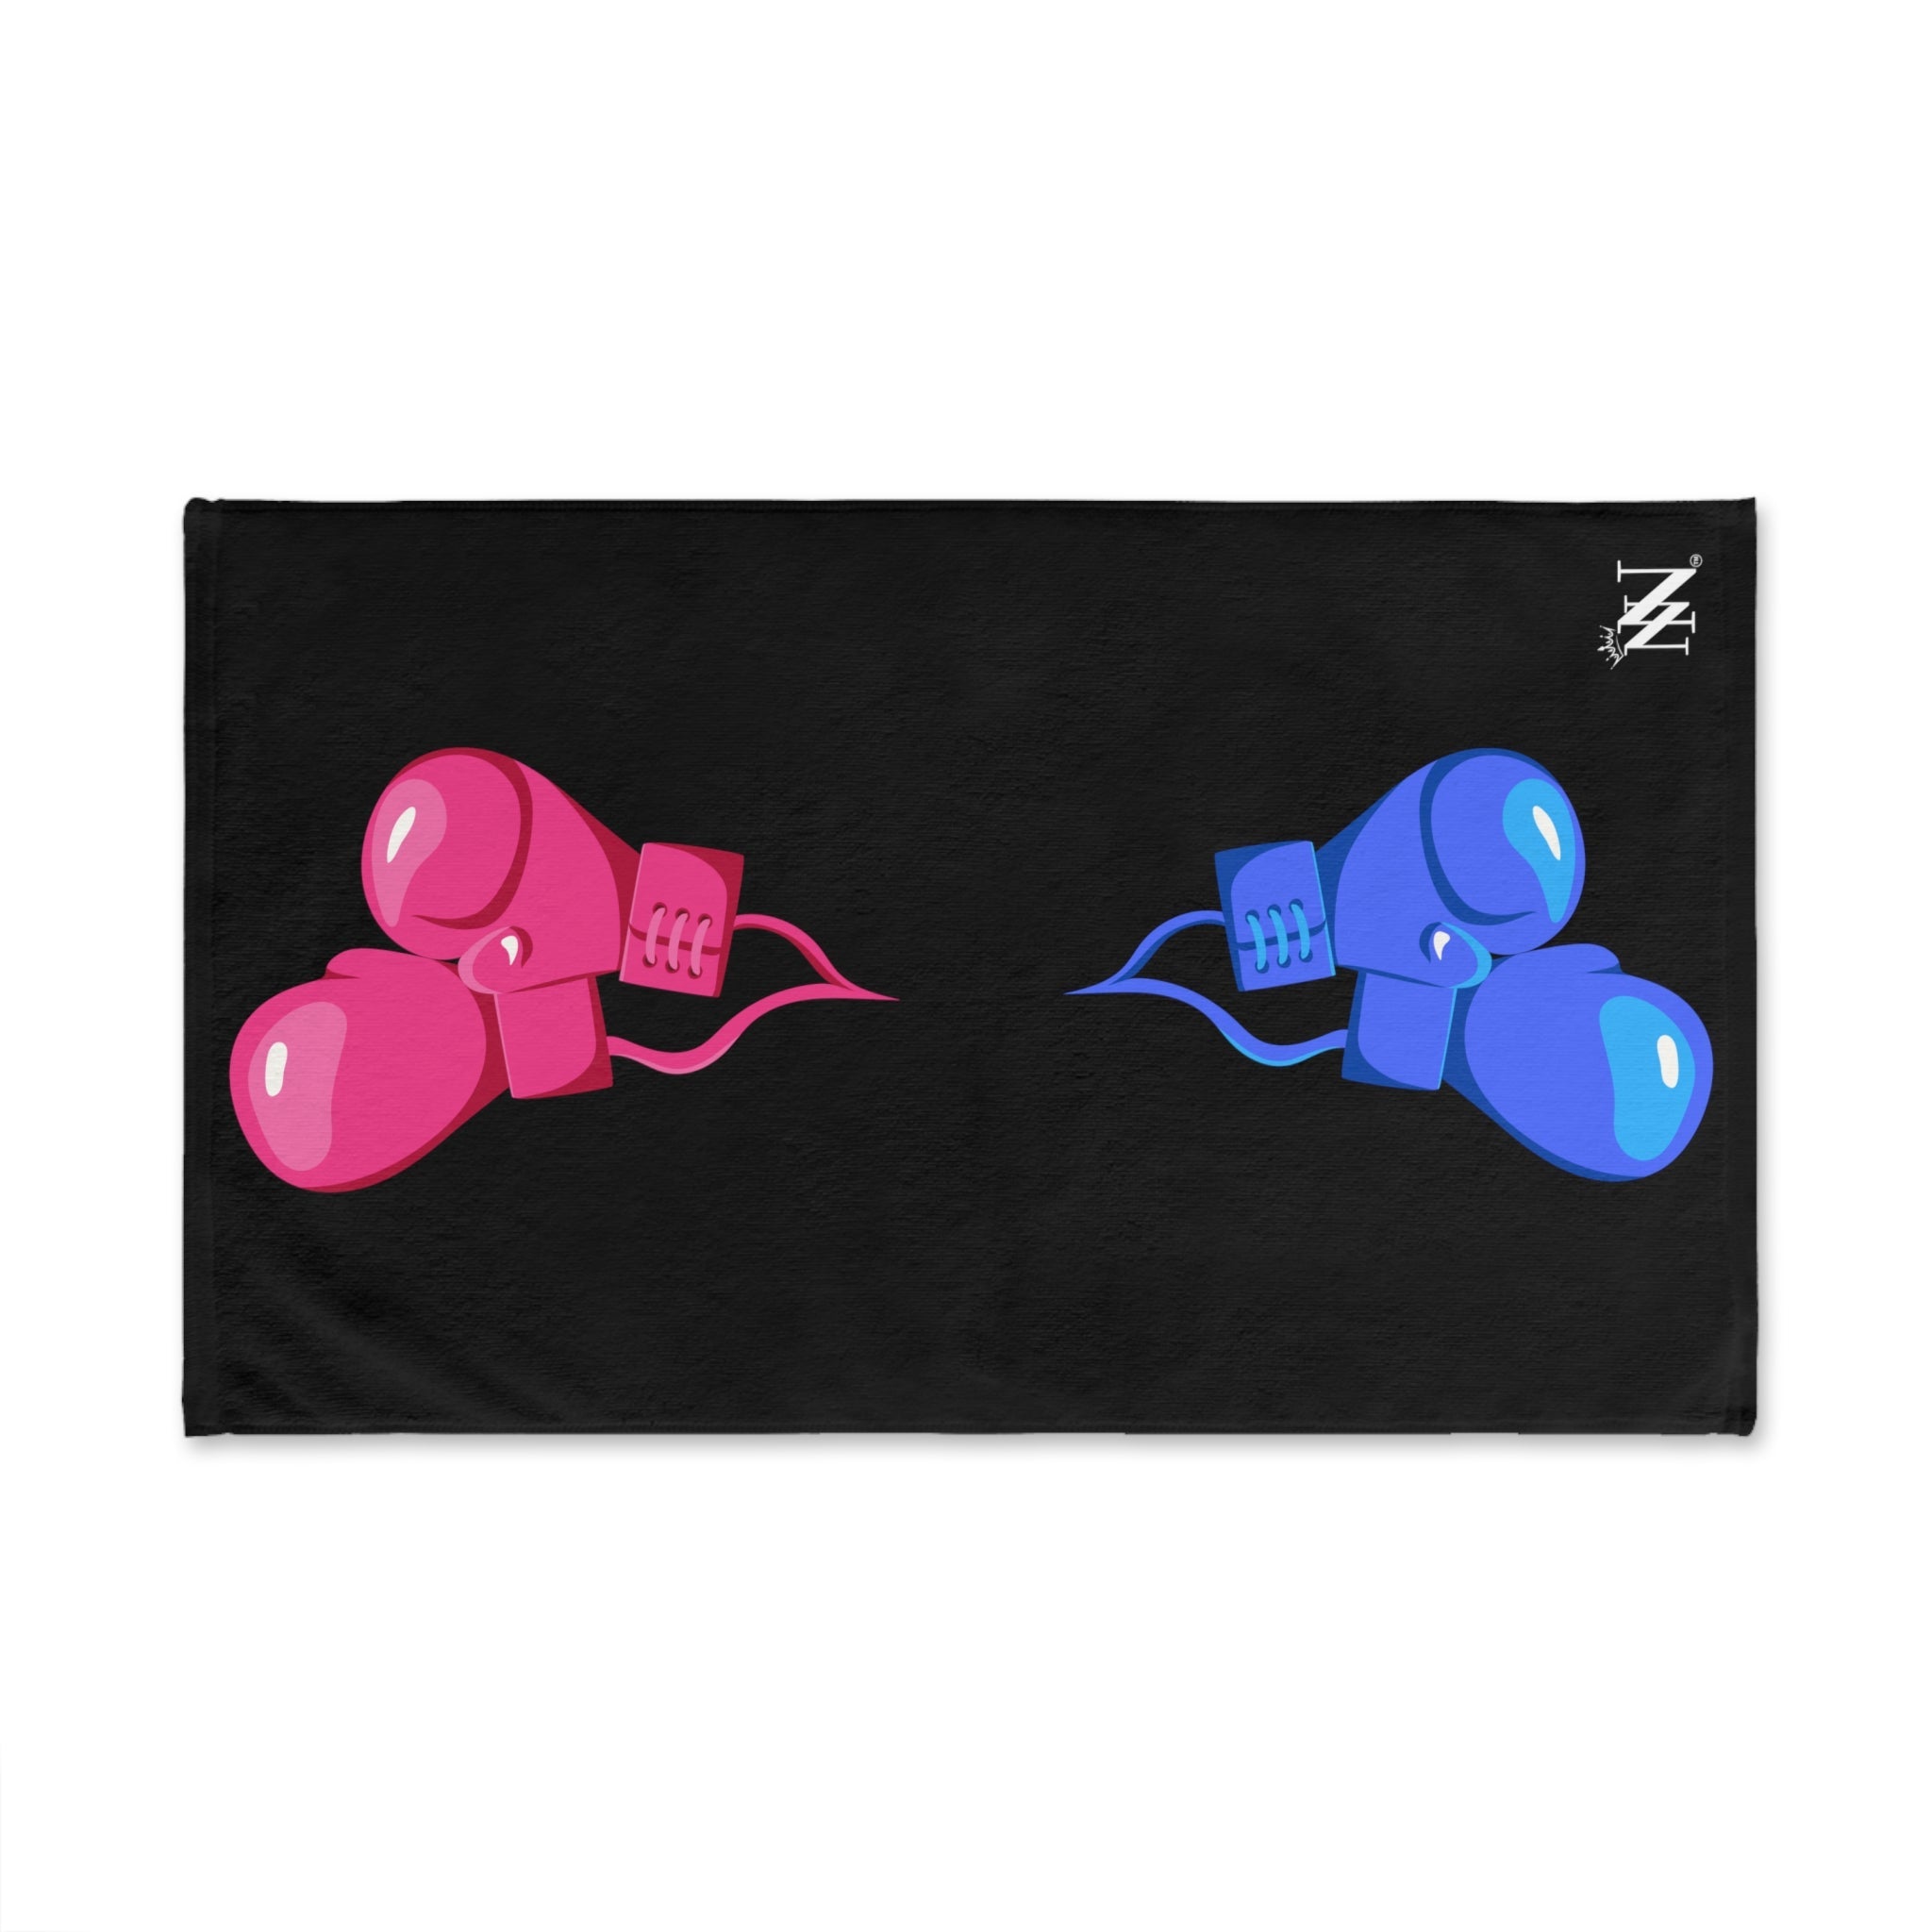 His Hers Boxing Black | Sexy Gifts for Boyfriend, Funny Towel Romantic Gift for Wedding Couple Fiance First Year 2nd Anniversary Valentines, Party Gag Gifts, Joke Humor Cloth for Husband Men BF NECTAR NAPKINS